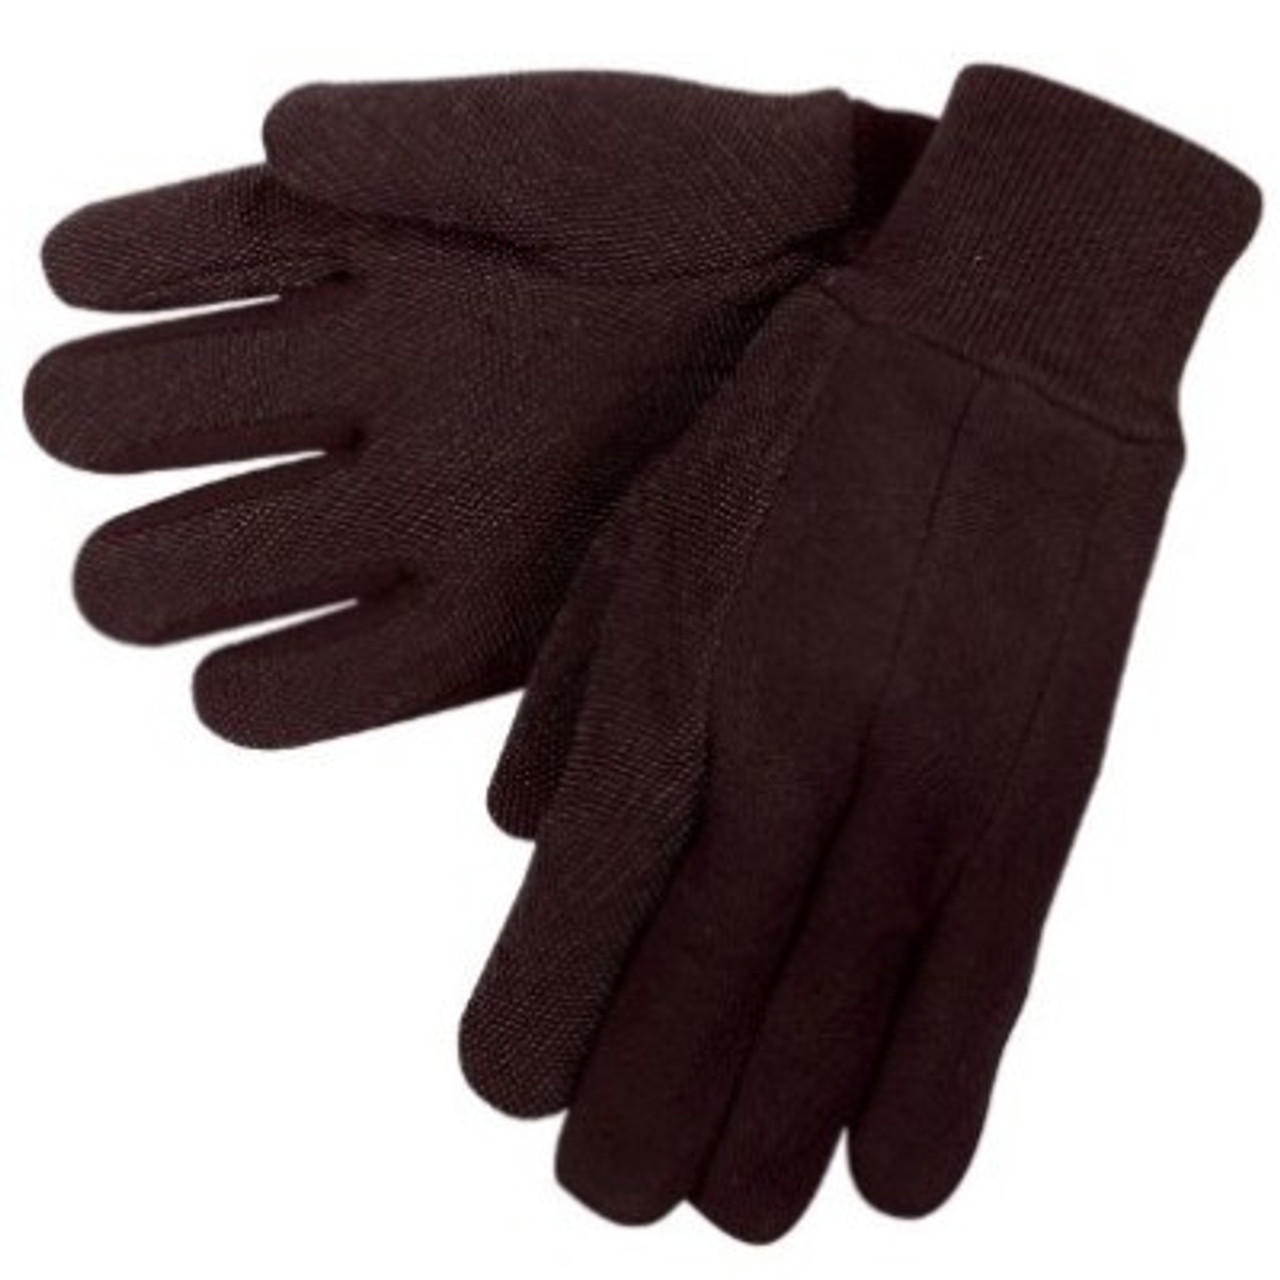 True Grip Gloves, Brown Jersey, with Mini-Dots, Large